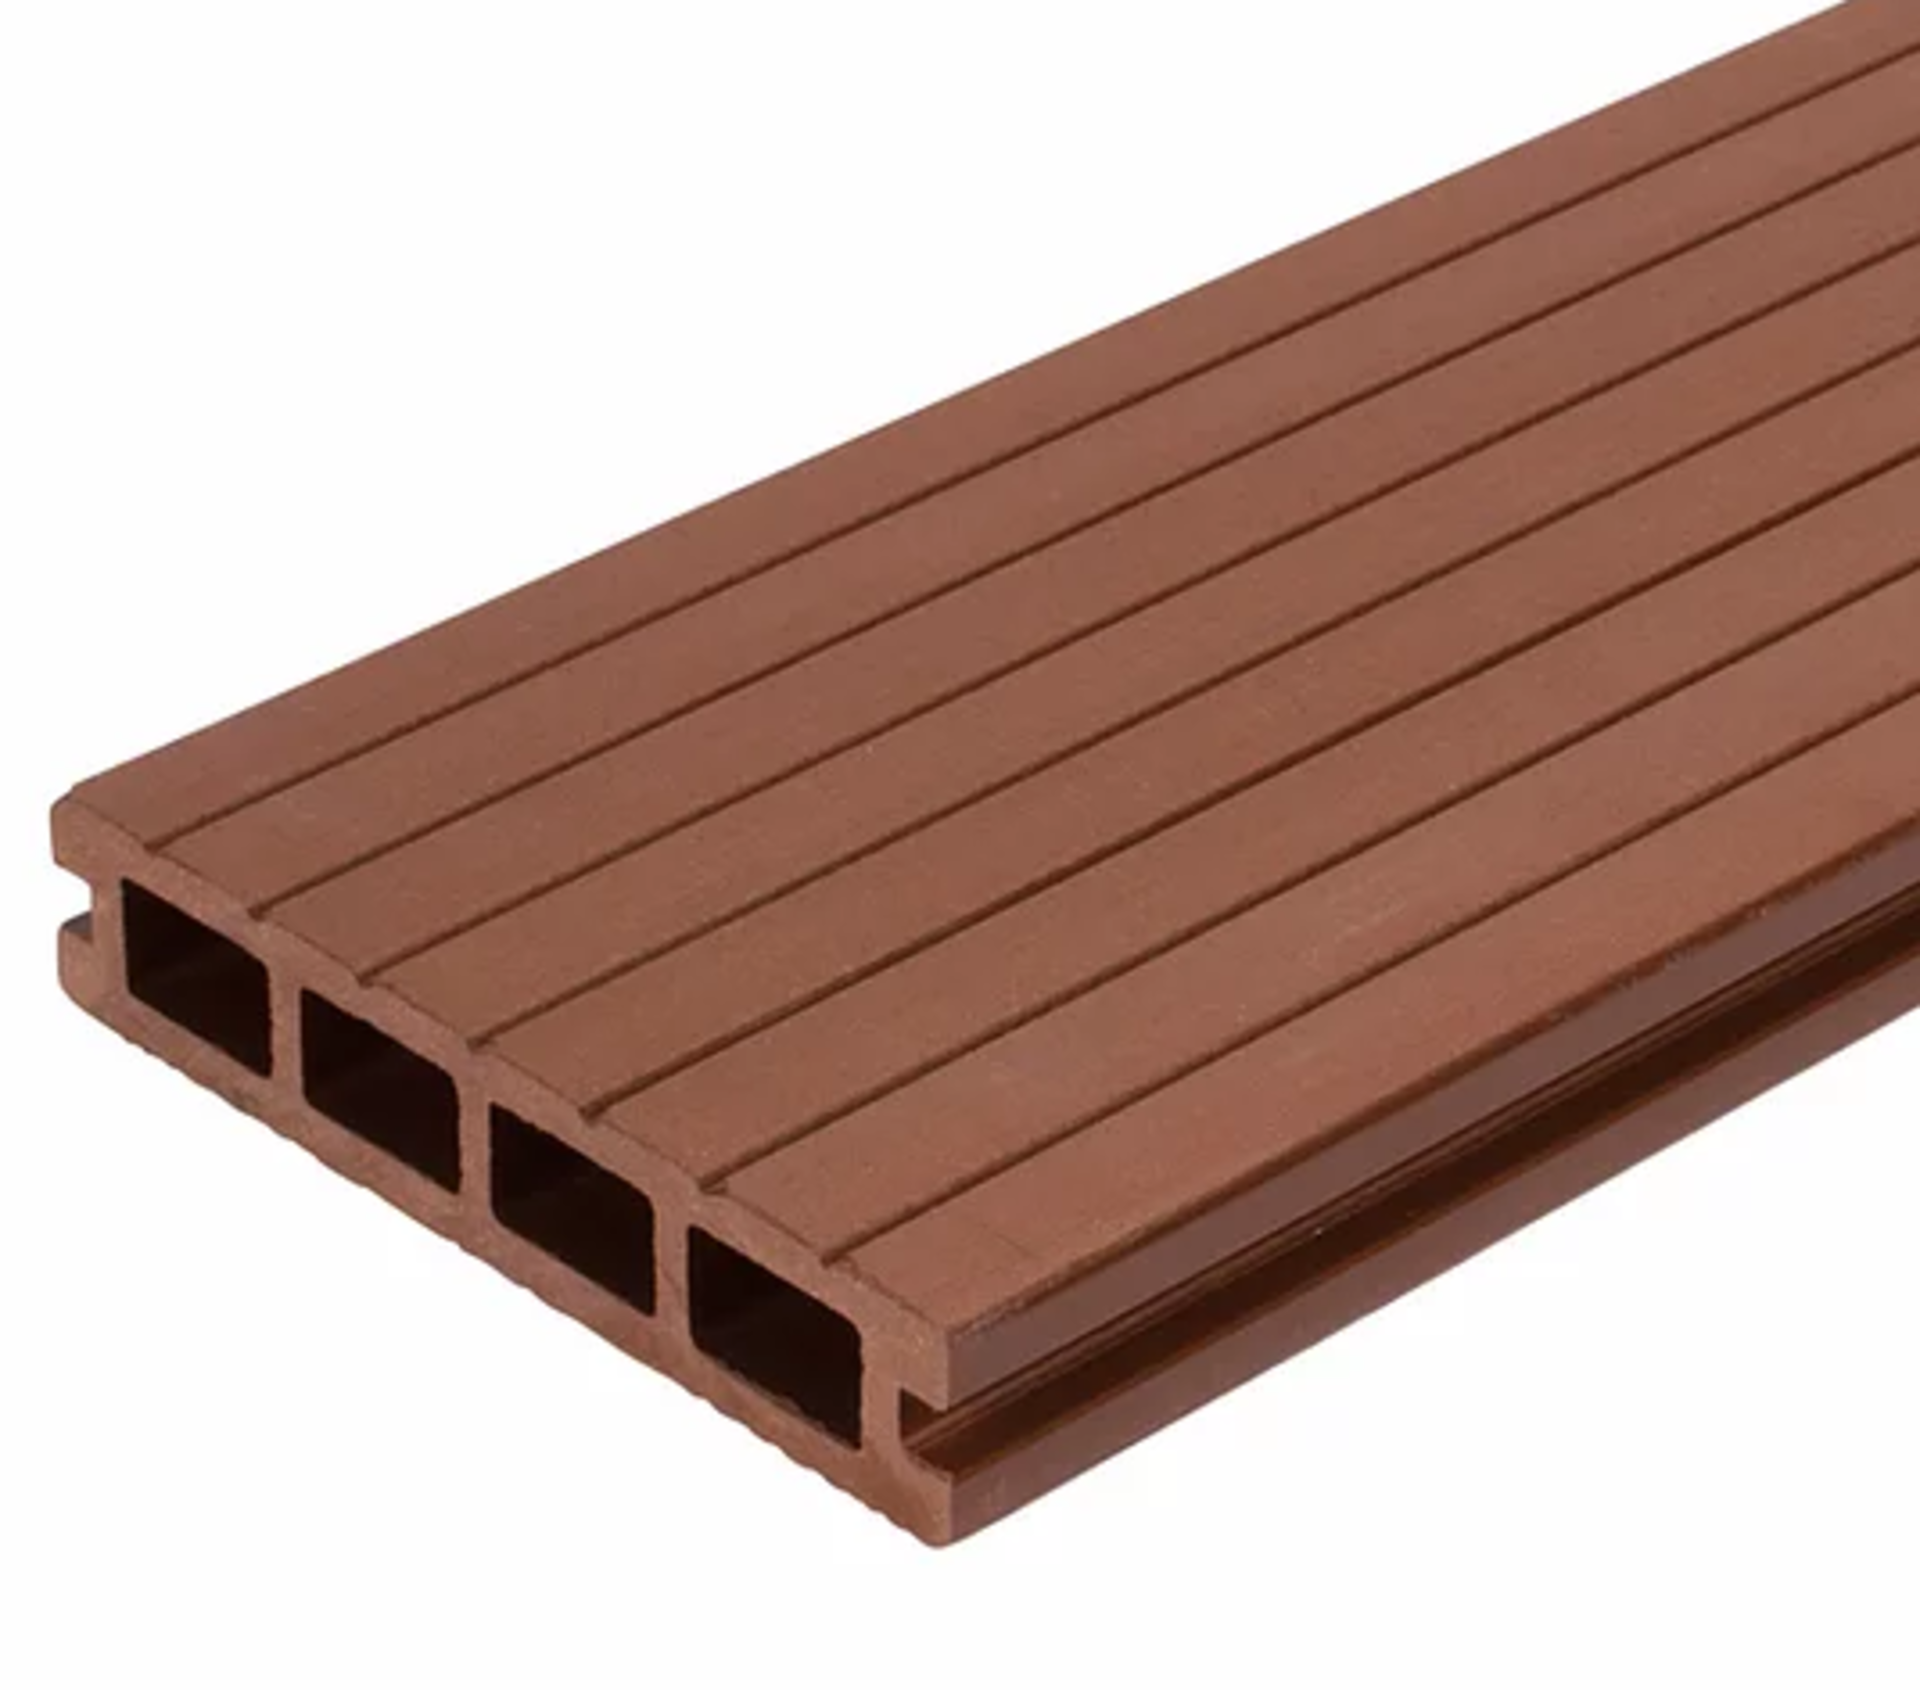 * 20 WPC Composite Coffee Double sided Embossed Woodgrain Decking Boards 2900mm x 146mm x 25mm - Image 2 of 4